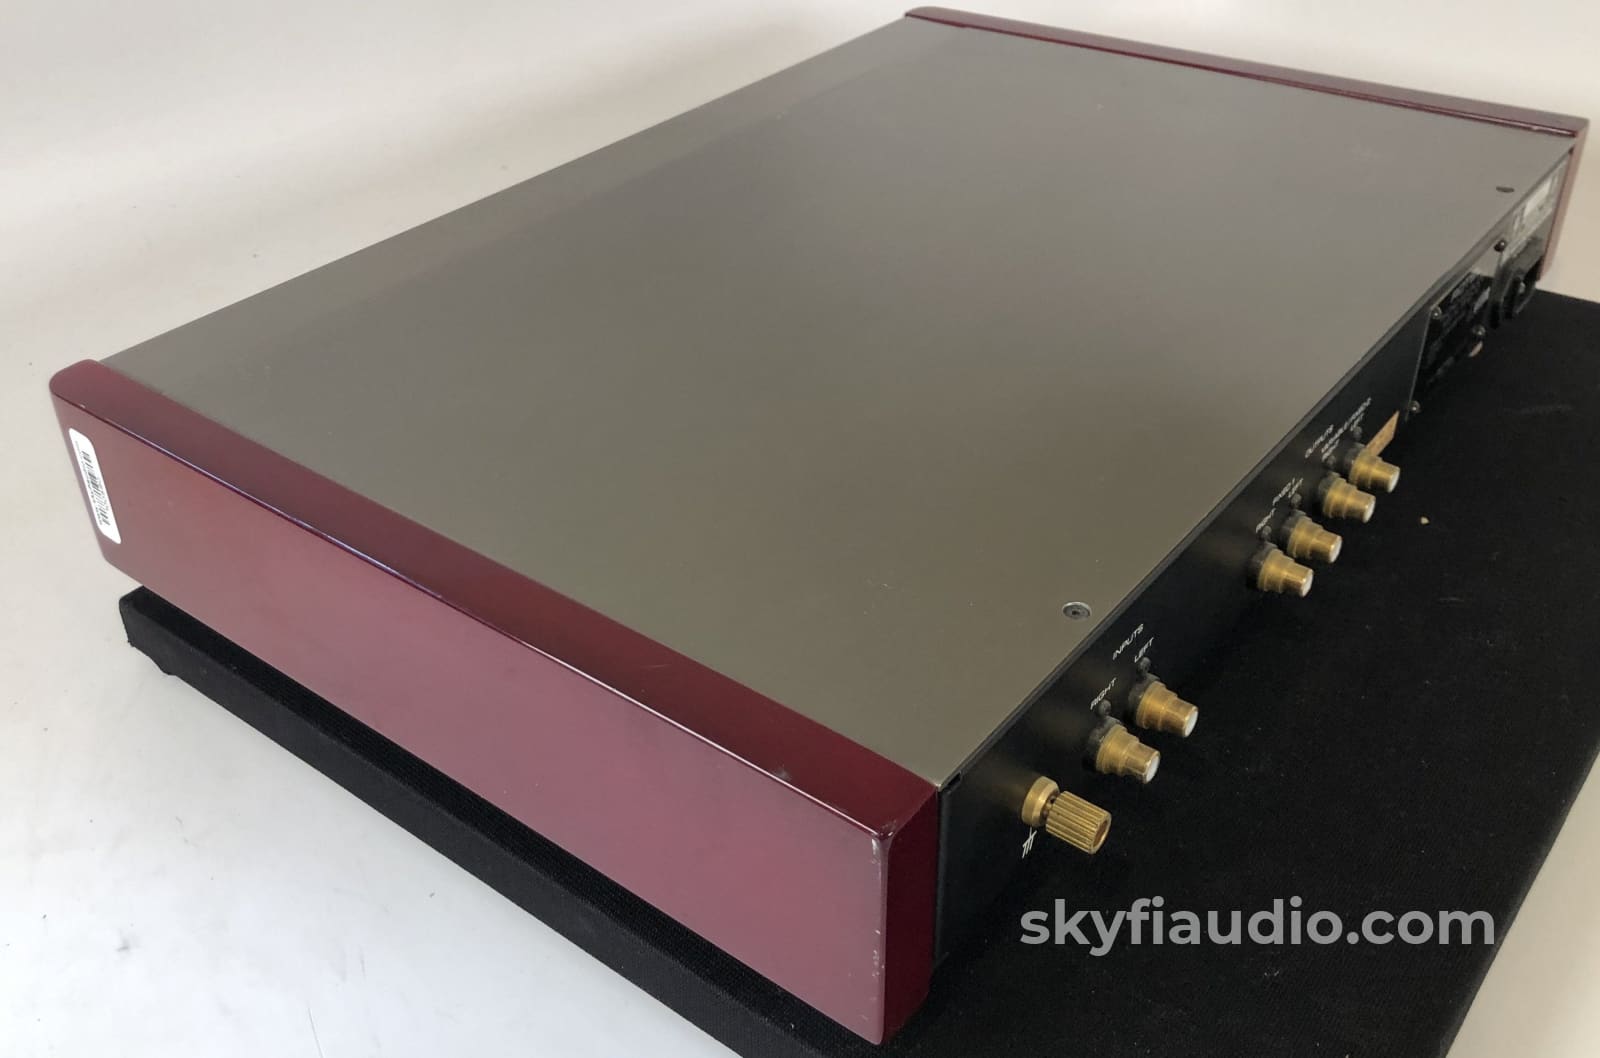 Rotel Rhq-10 Phono Preamp - The Best From Very Rare Preamplifier